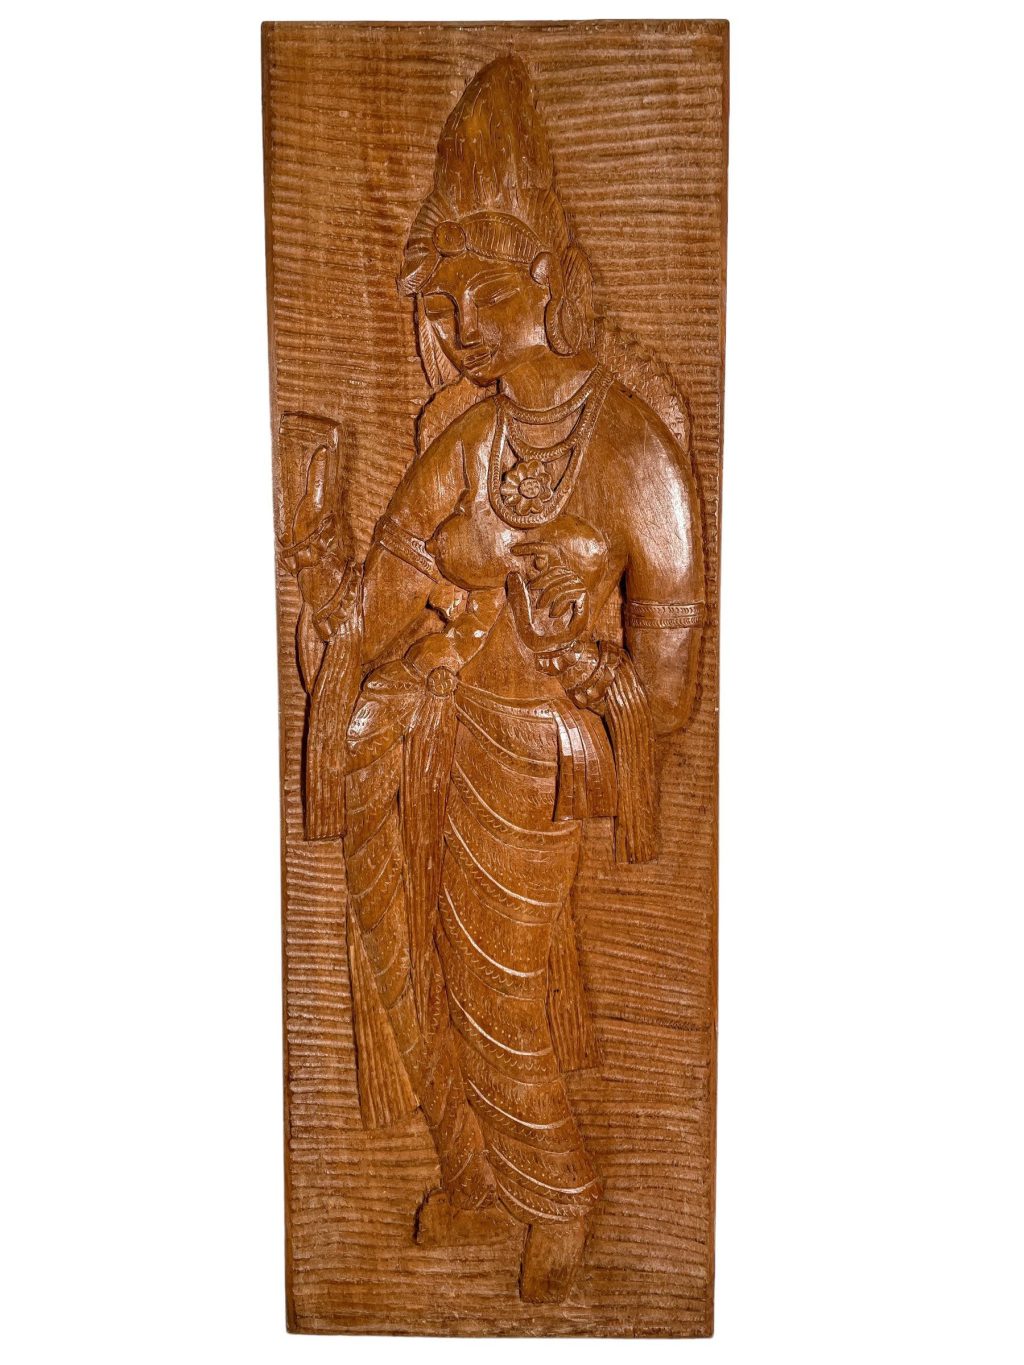 Vintage Balinese Indonesian Asian Lady Large Wooden Intricately Carved Finely Detailed Panel Good Luck Wall Display c1970-80’s